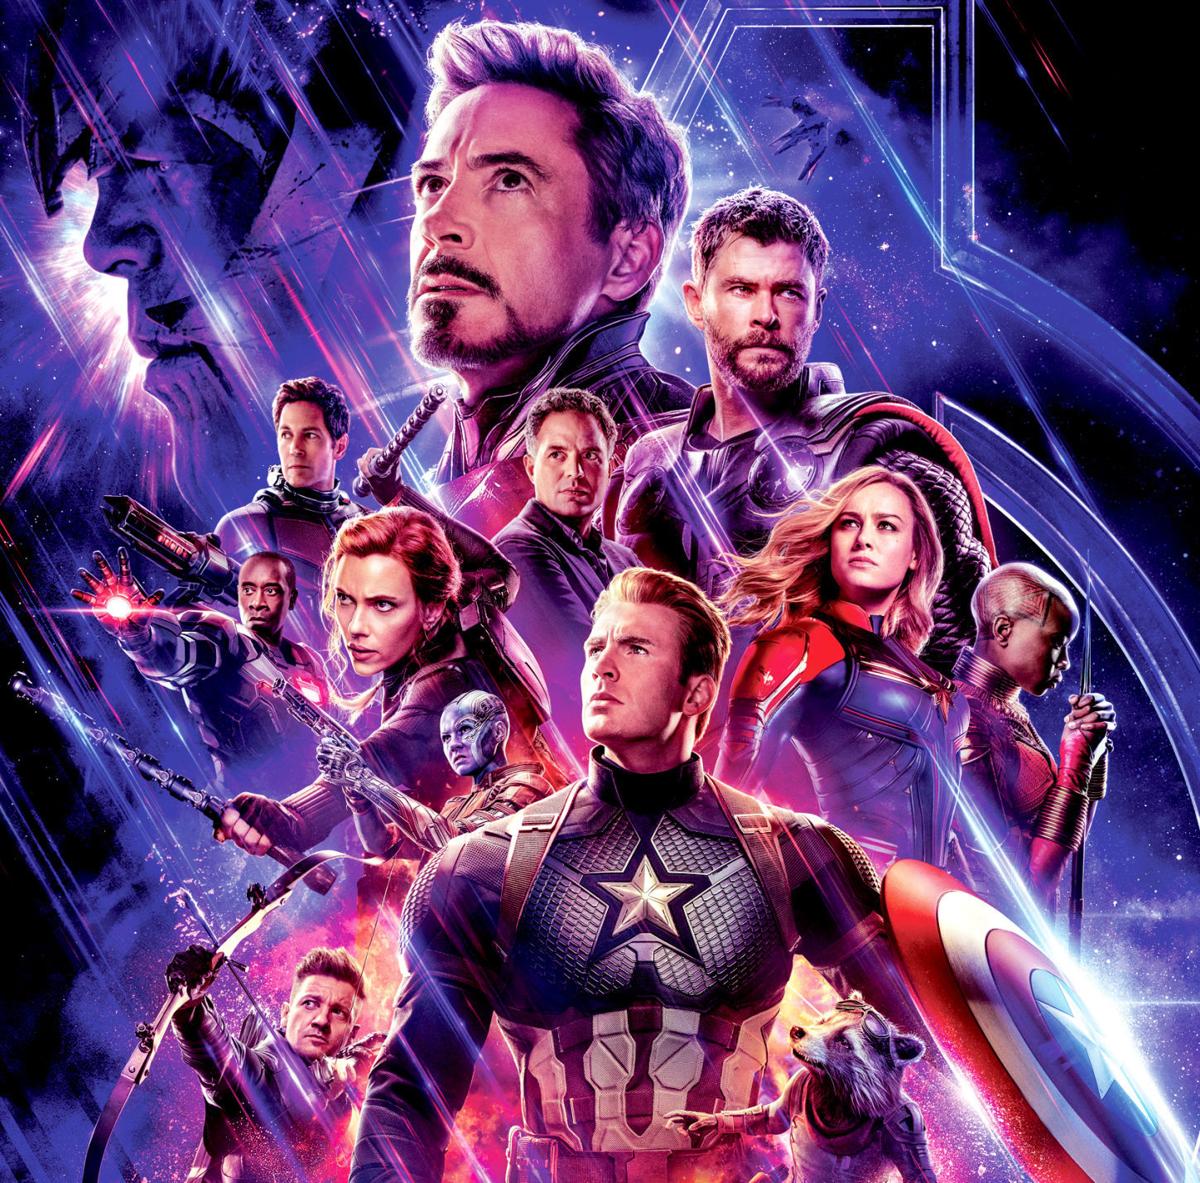 Robert Downey Jr. Celebrates 2 Years Of 'Avengers: Endgame' With A